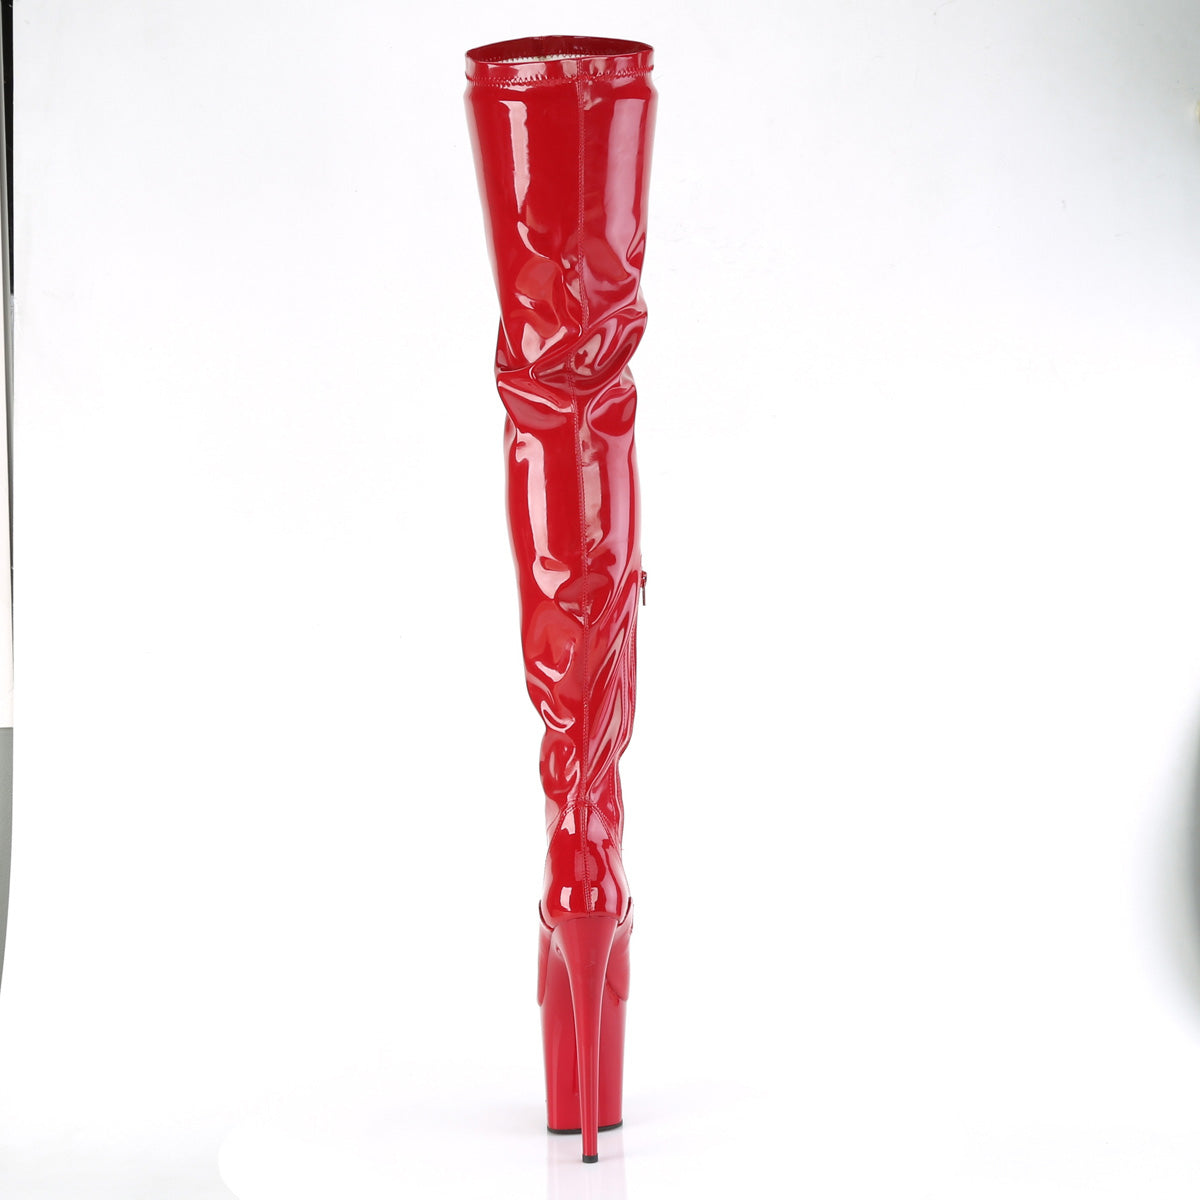 FLAMINGO-4000 Pleaser Crotch/Chap Boots Red Str. Pat/Red Platforms (Exotic Dancing)